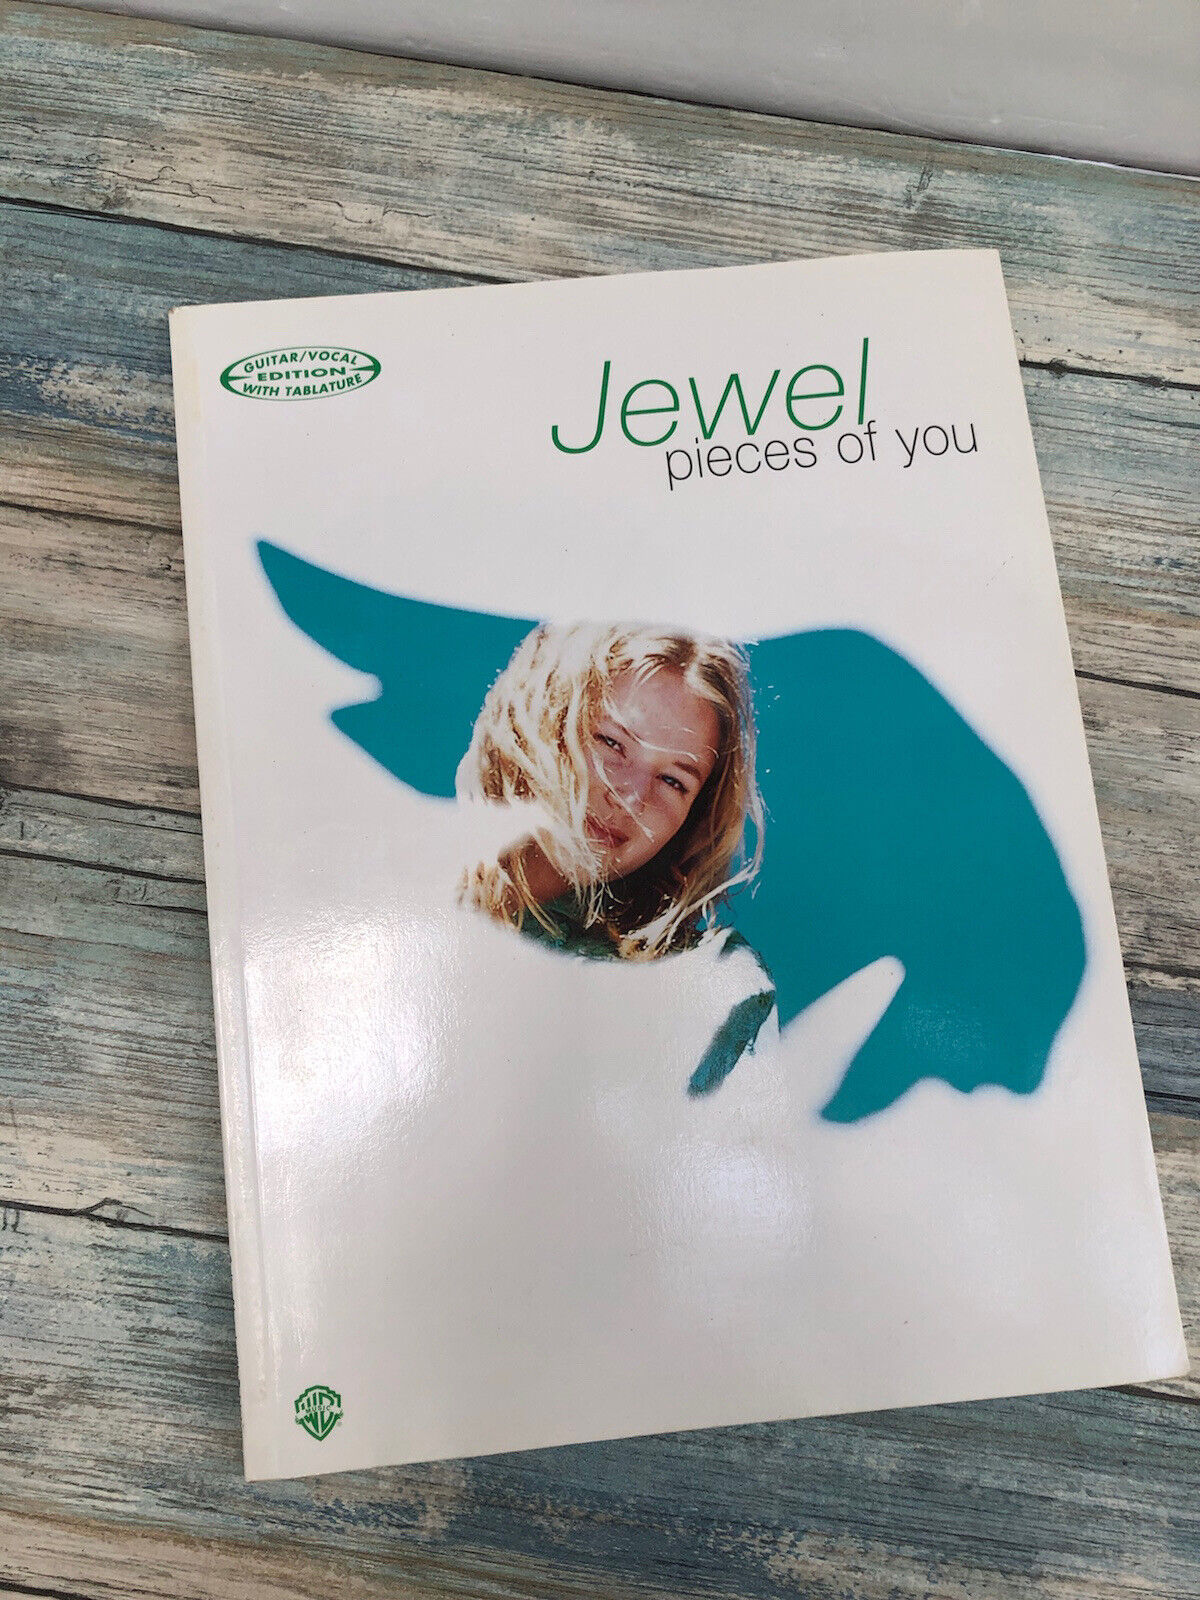 Jewel “pieces Of You" Guitar/vocal Edition Music Book 1996, 60 Pages